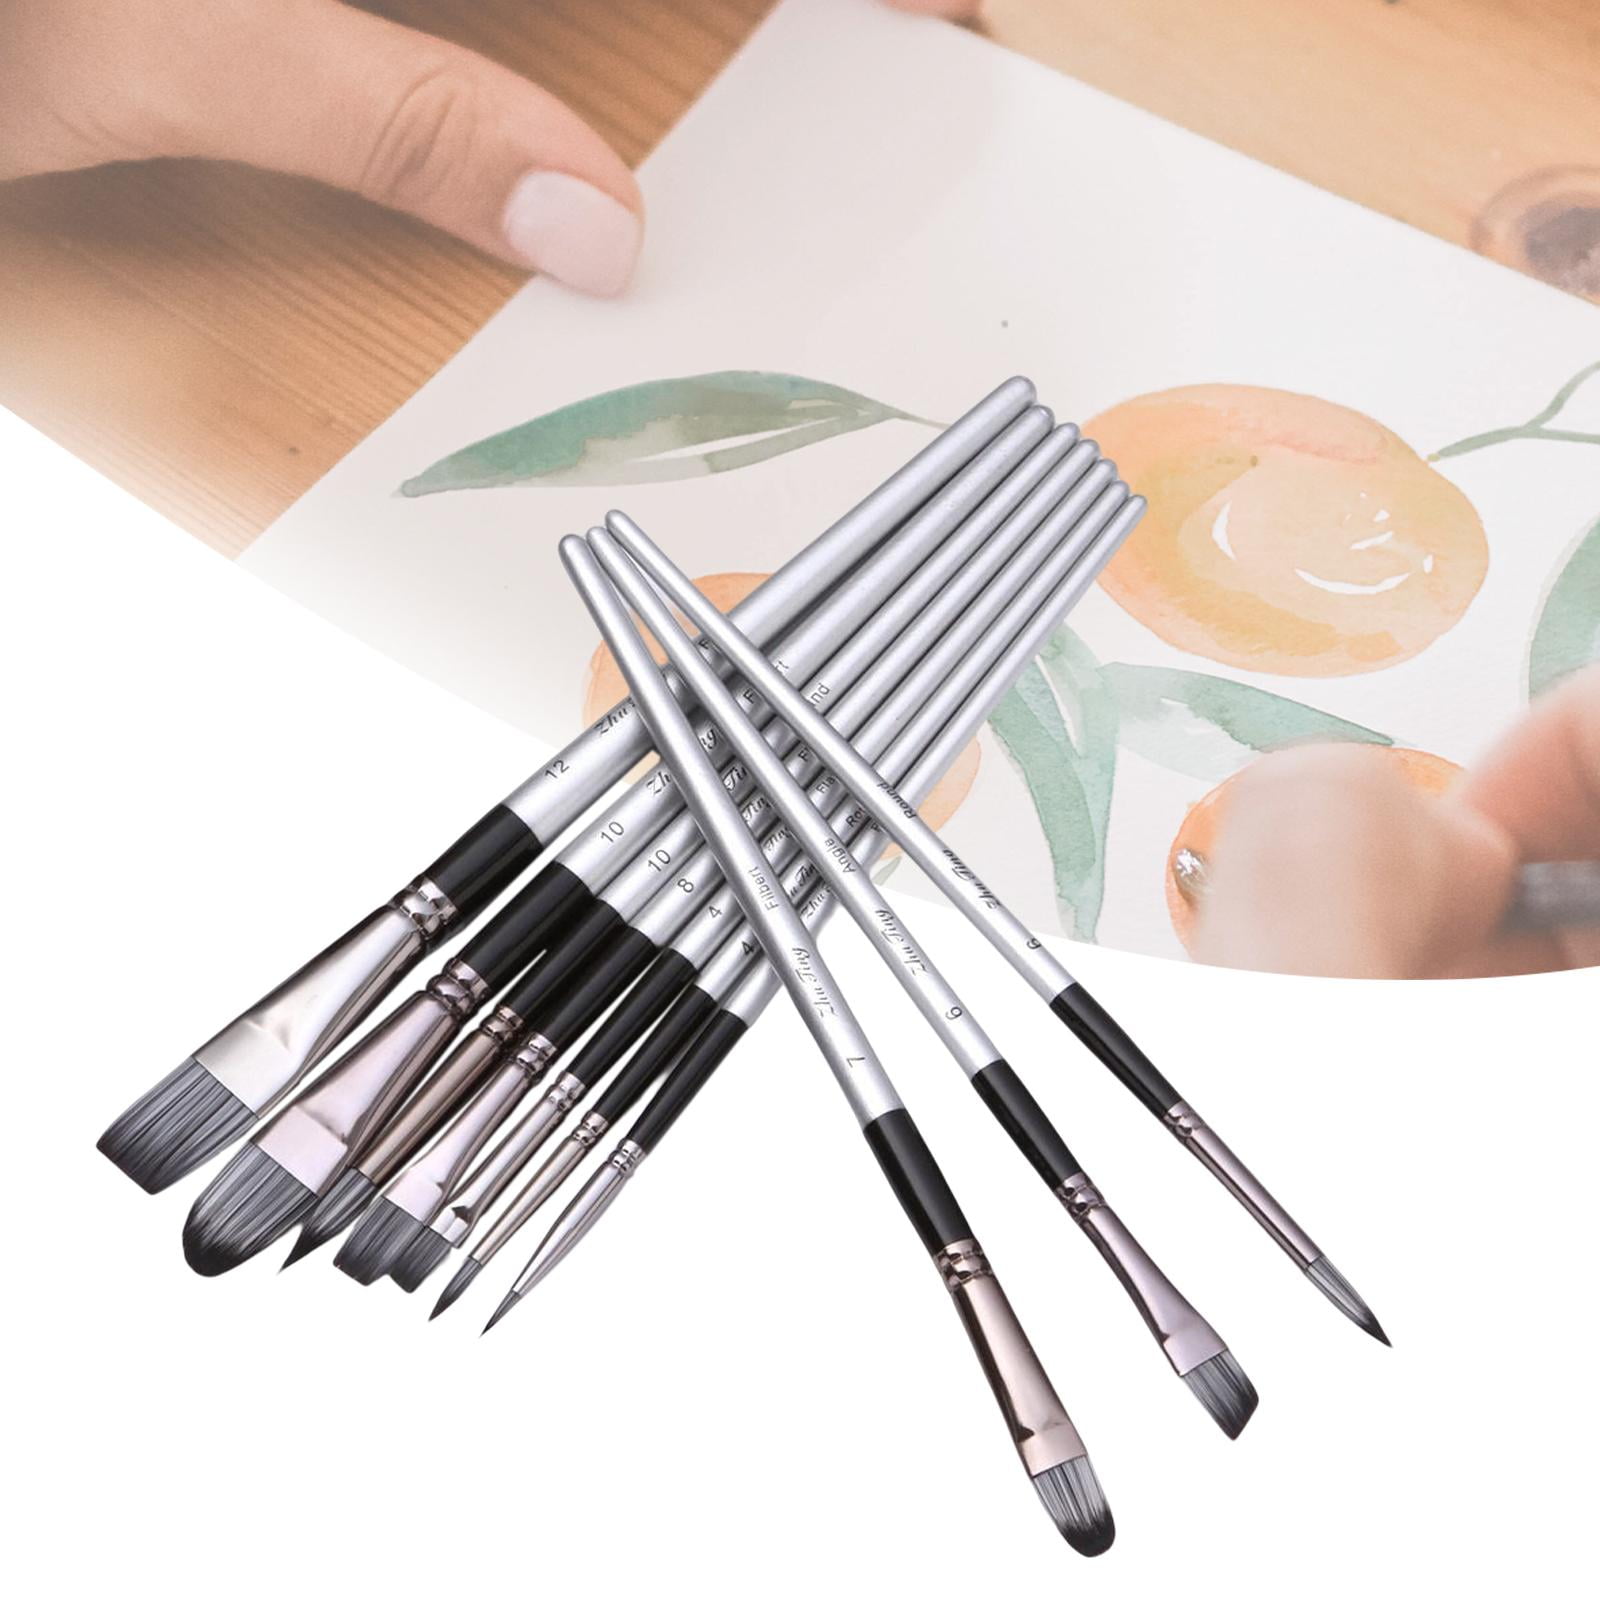 Dstone Painting Brushes Set of 12 pcs Professional Round Pointed